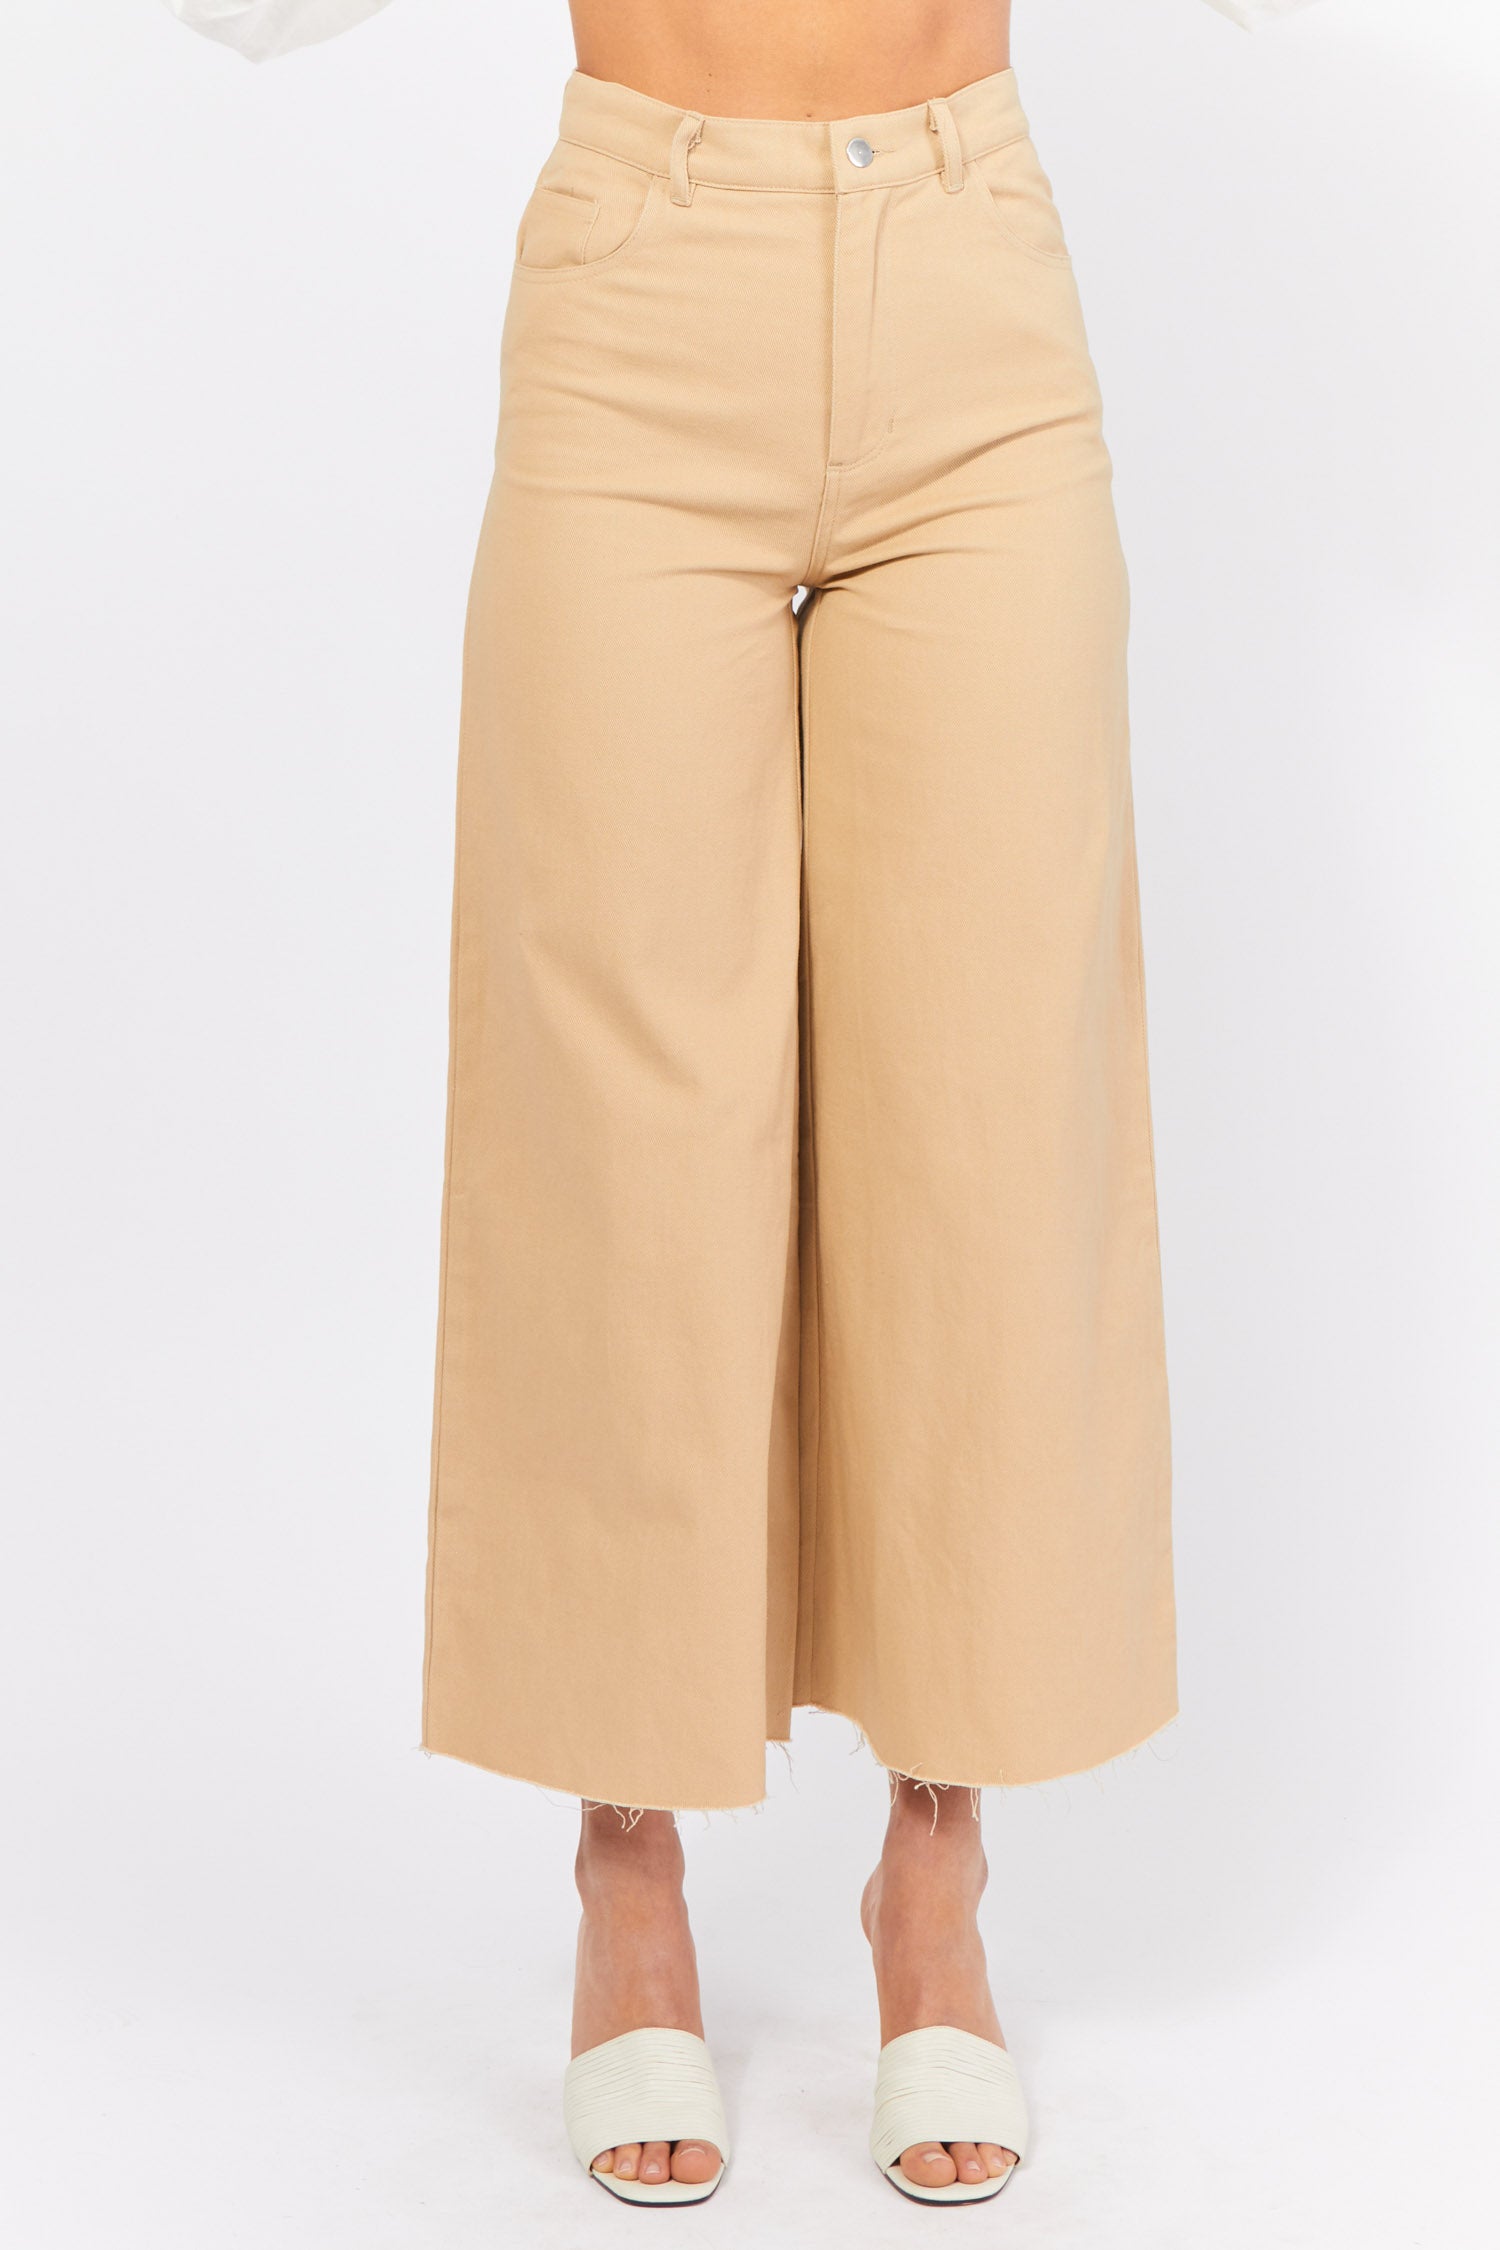 EDITH JEANS - BEIGE